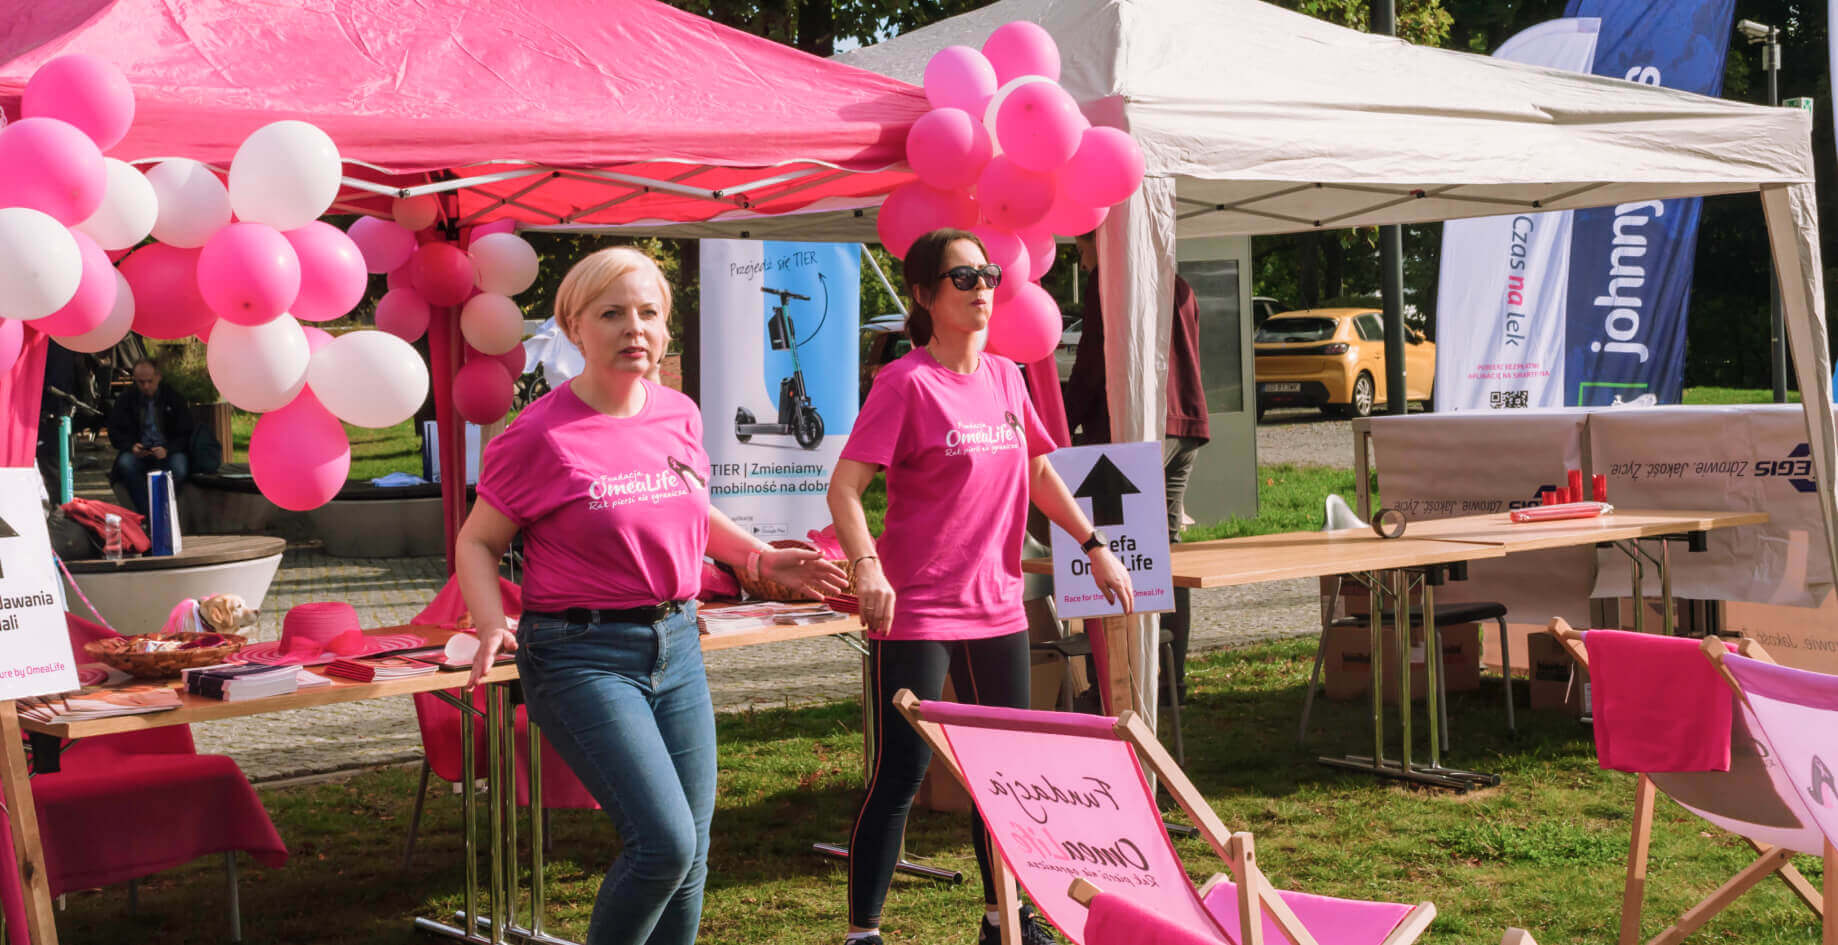 Johnnybros became a sponsor of race for the cure polska 2021 a fitness walk and run sporting event taking place in gdansk which supports women suffering from breast cancer